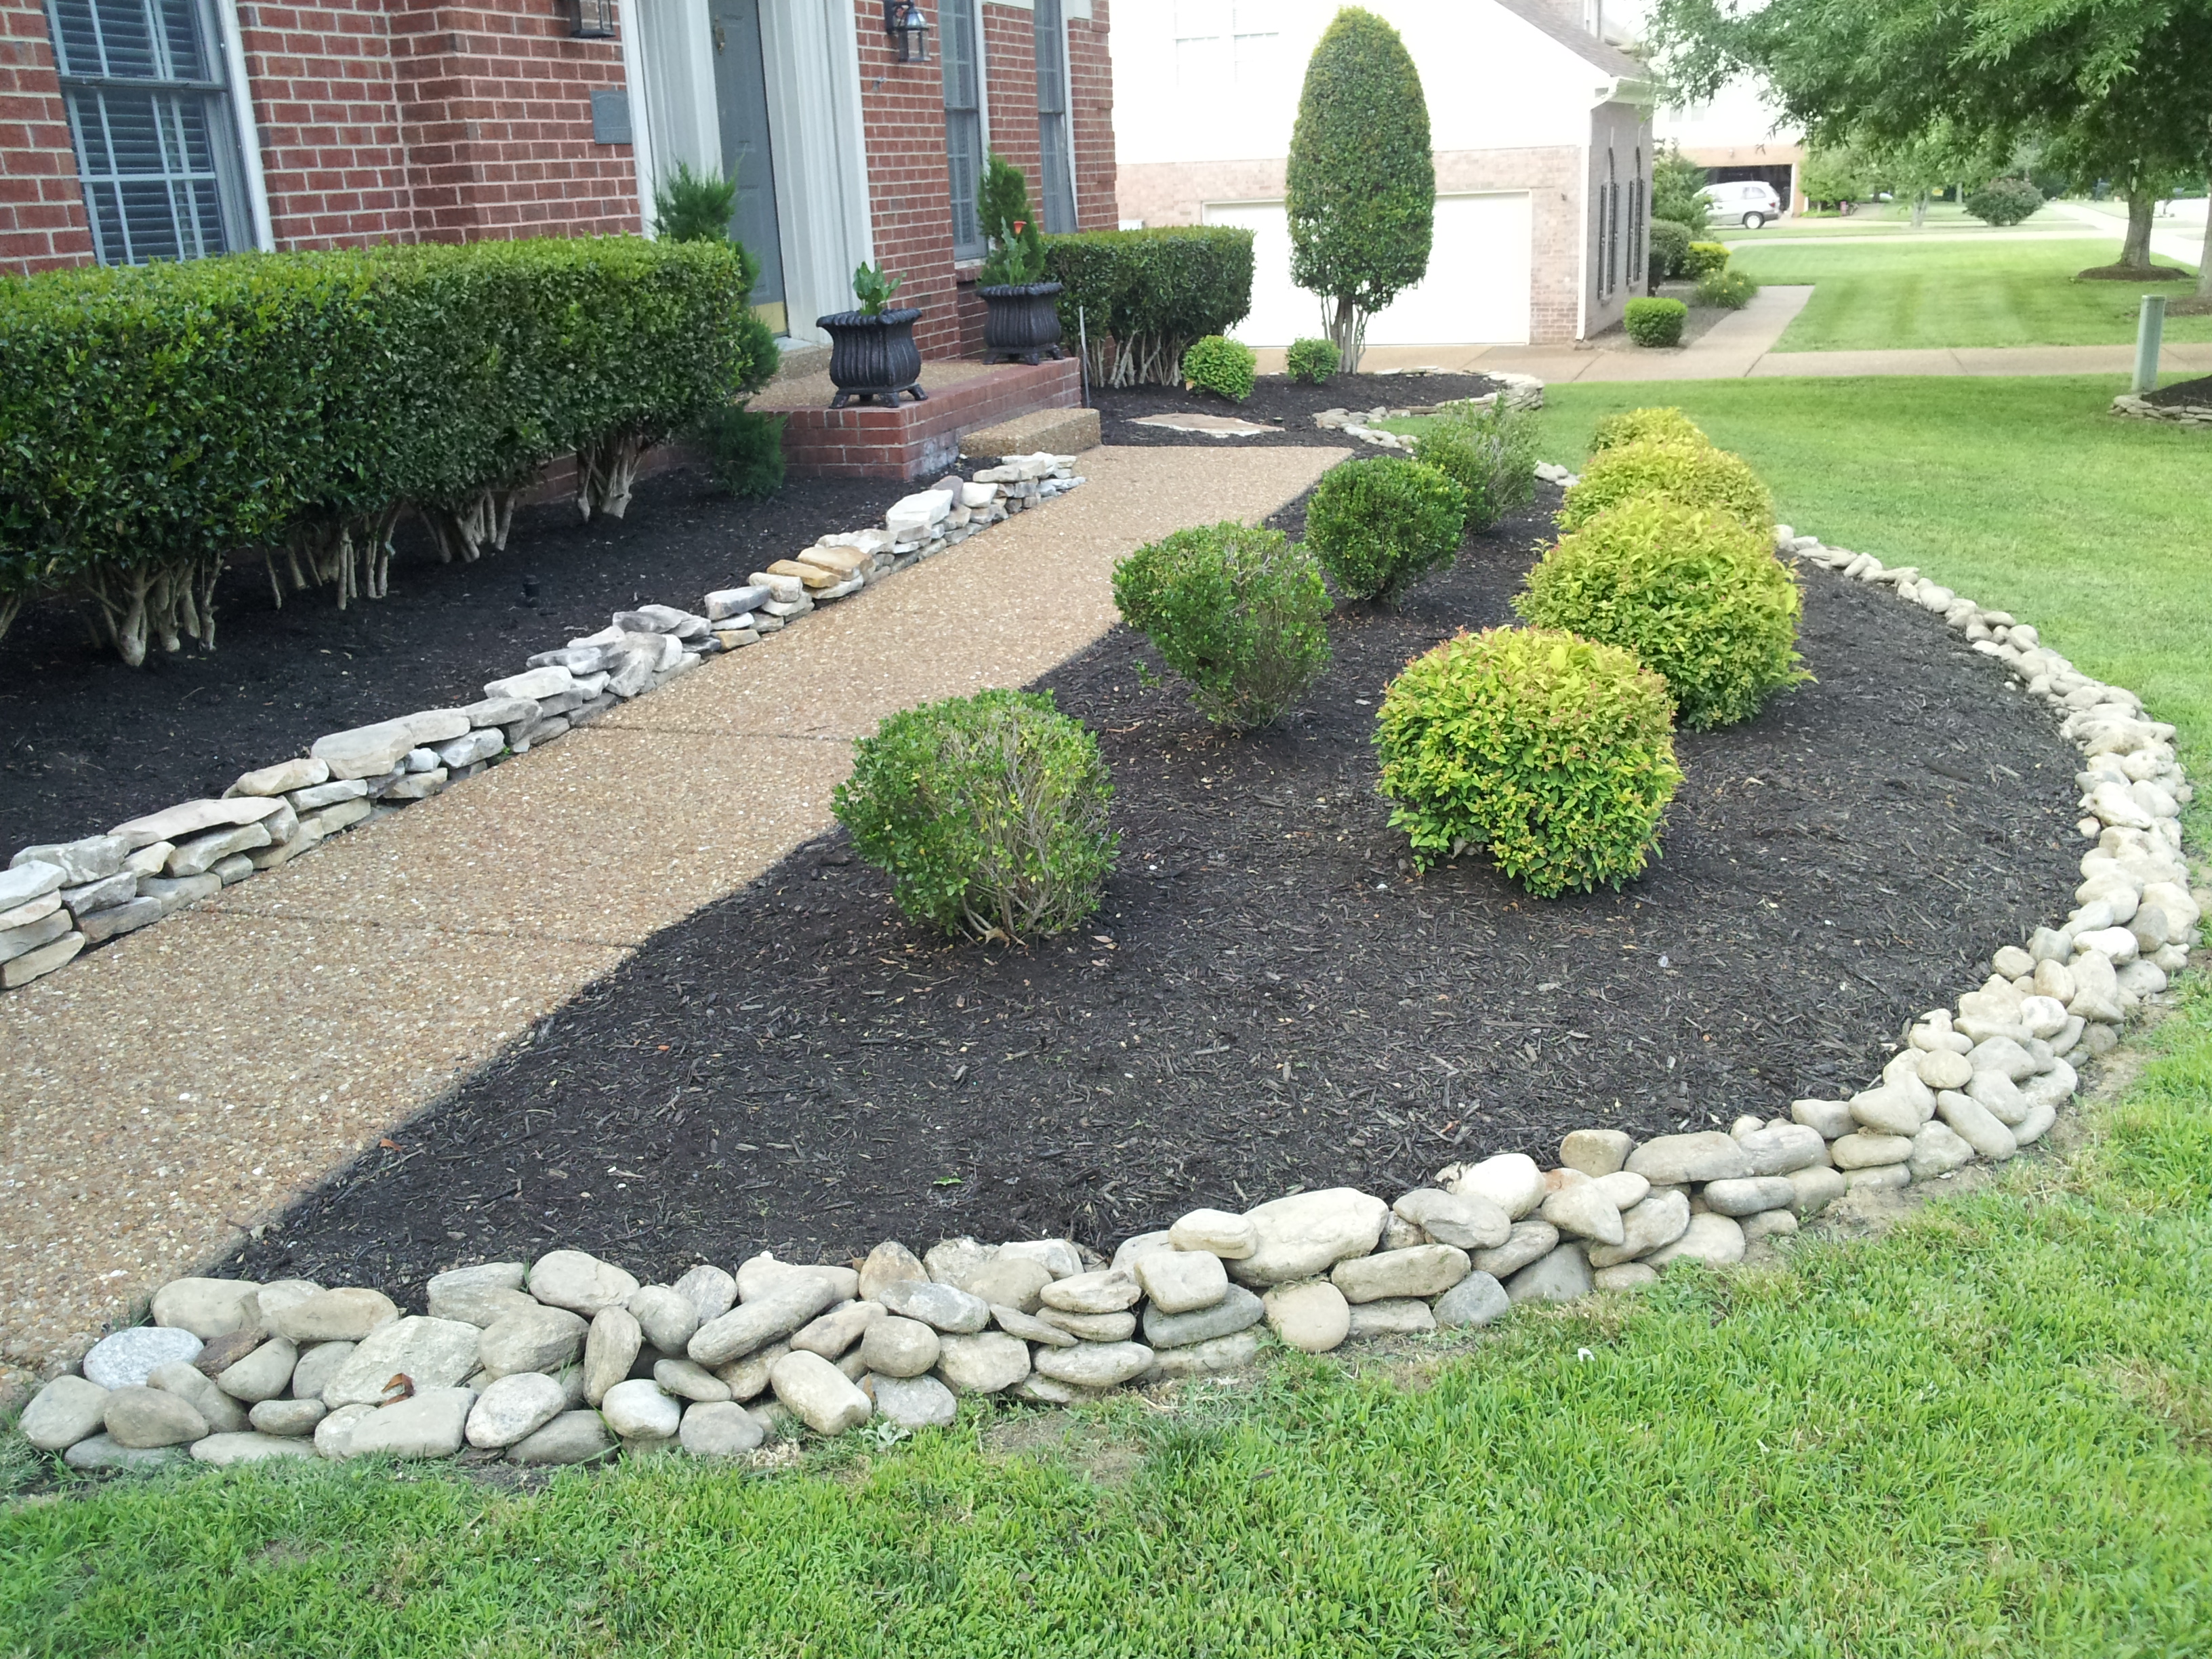 Landscaping With Rocks And Stones, Landscaping With Rocks